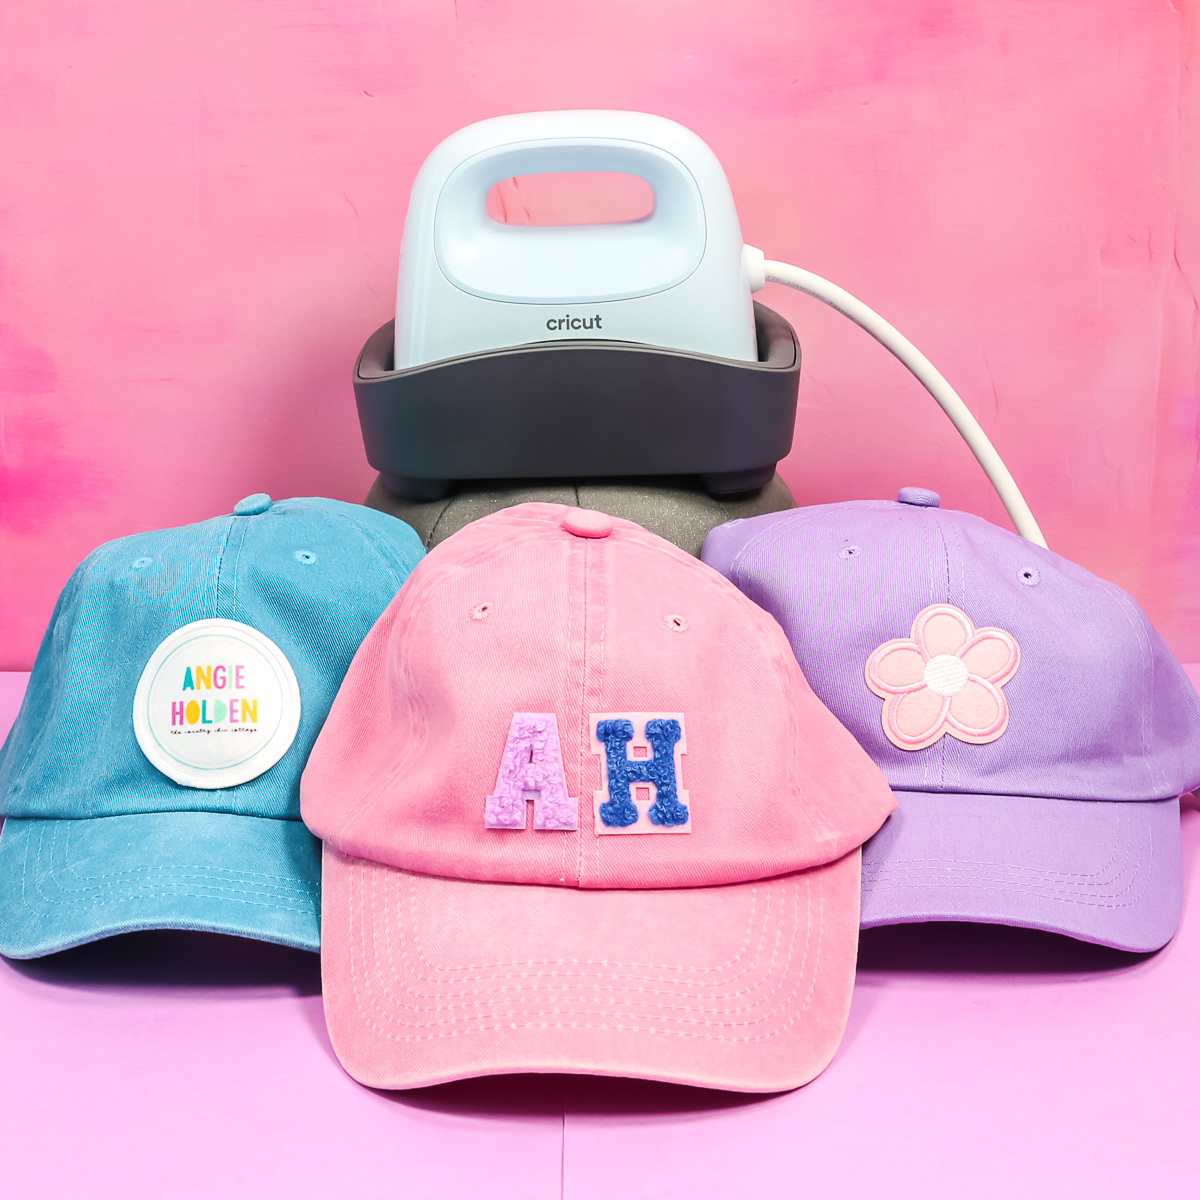 Adding Heat Transfer Vinyl to Hats - Angie Holden The Country Chic